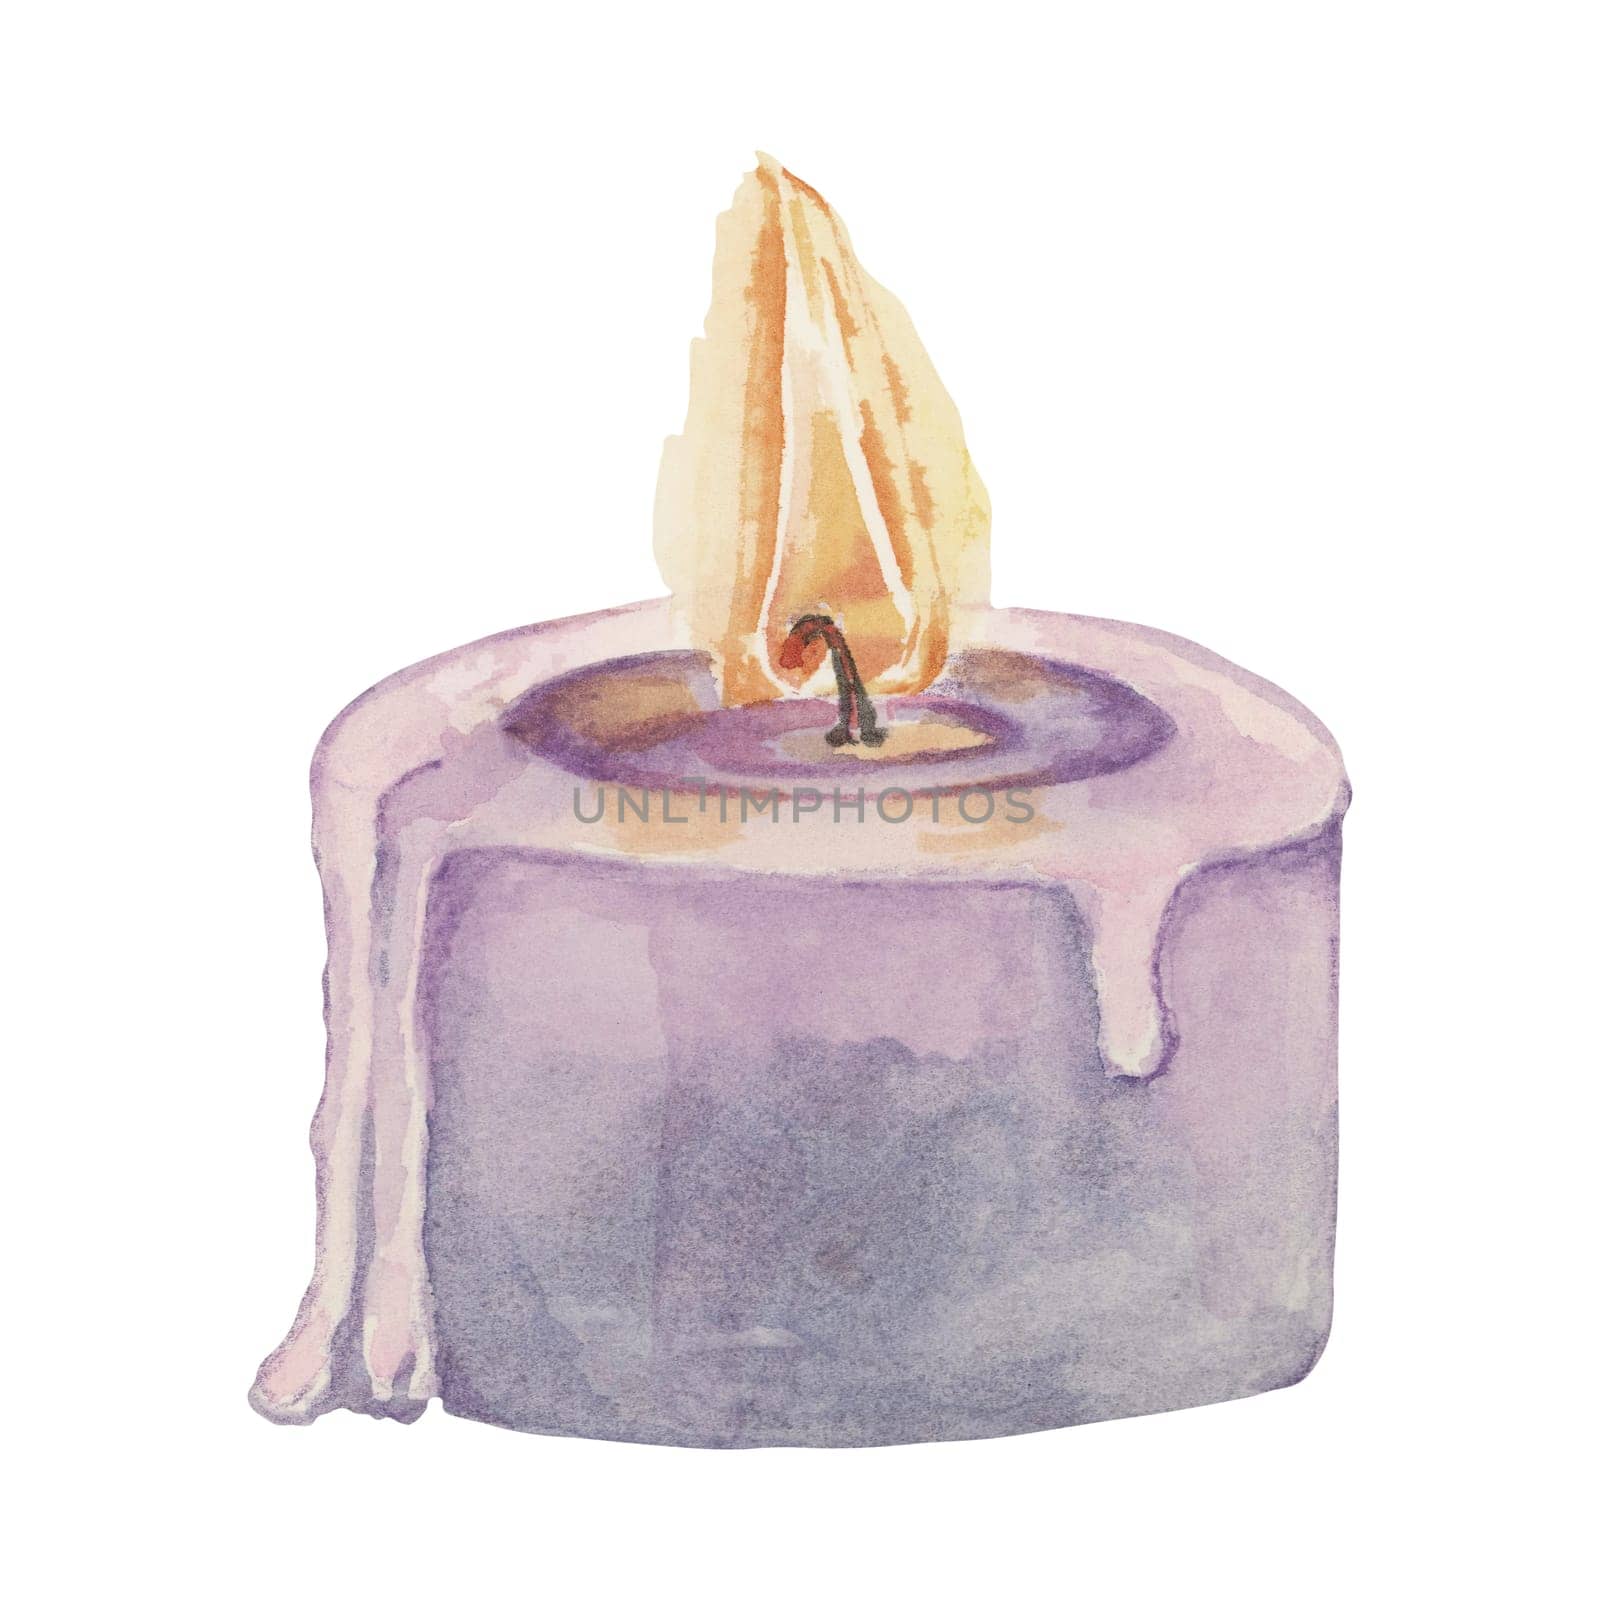 Lavender melting lilac wax candle for home fragrance. Home spa aromatherapy watercolor illustration. Hand drawn clipart for beauty, cosmetics, labels design, organic products, wellness, packaging